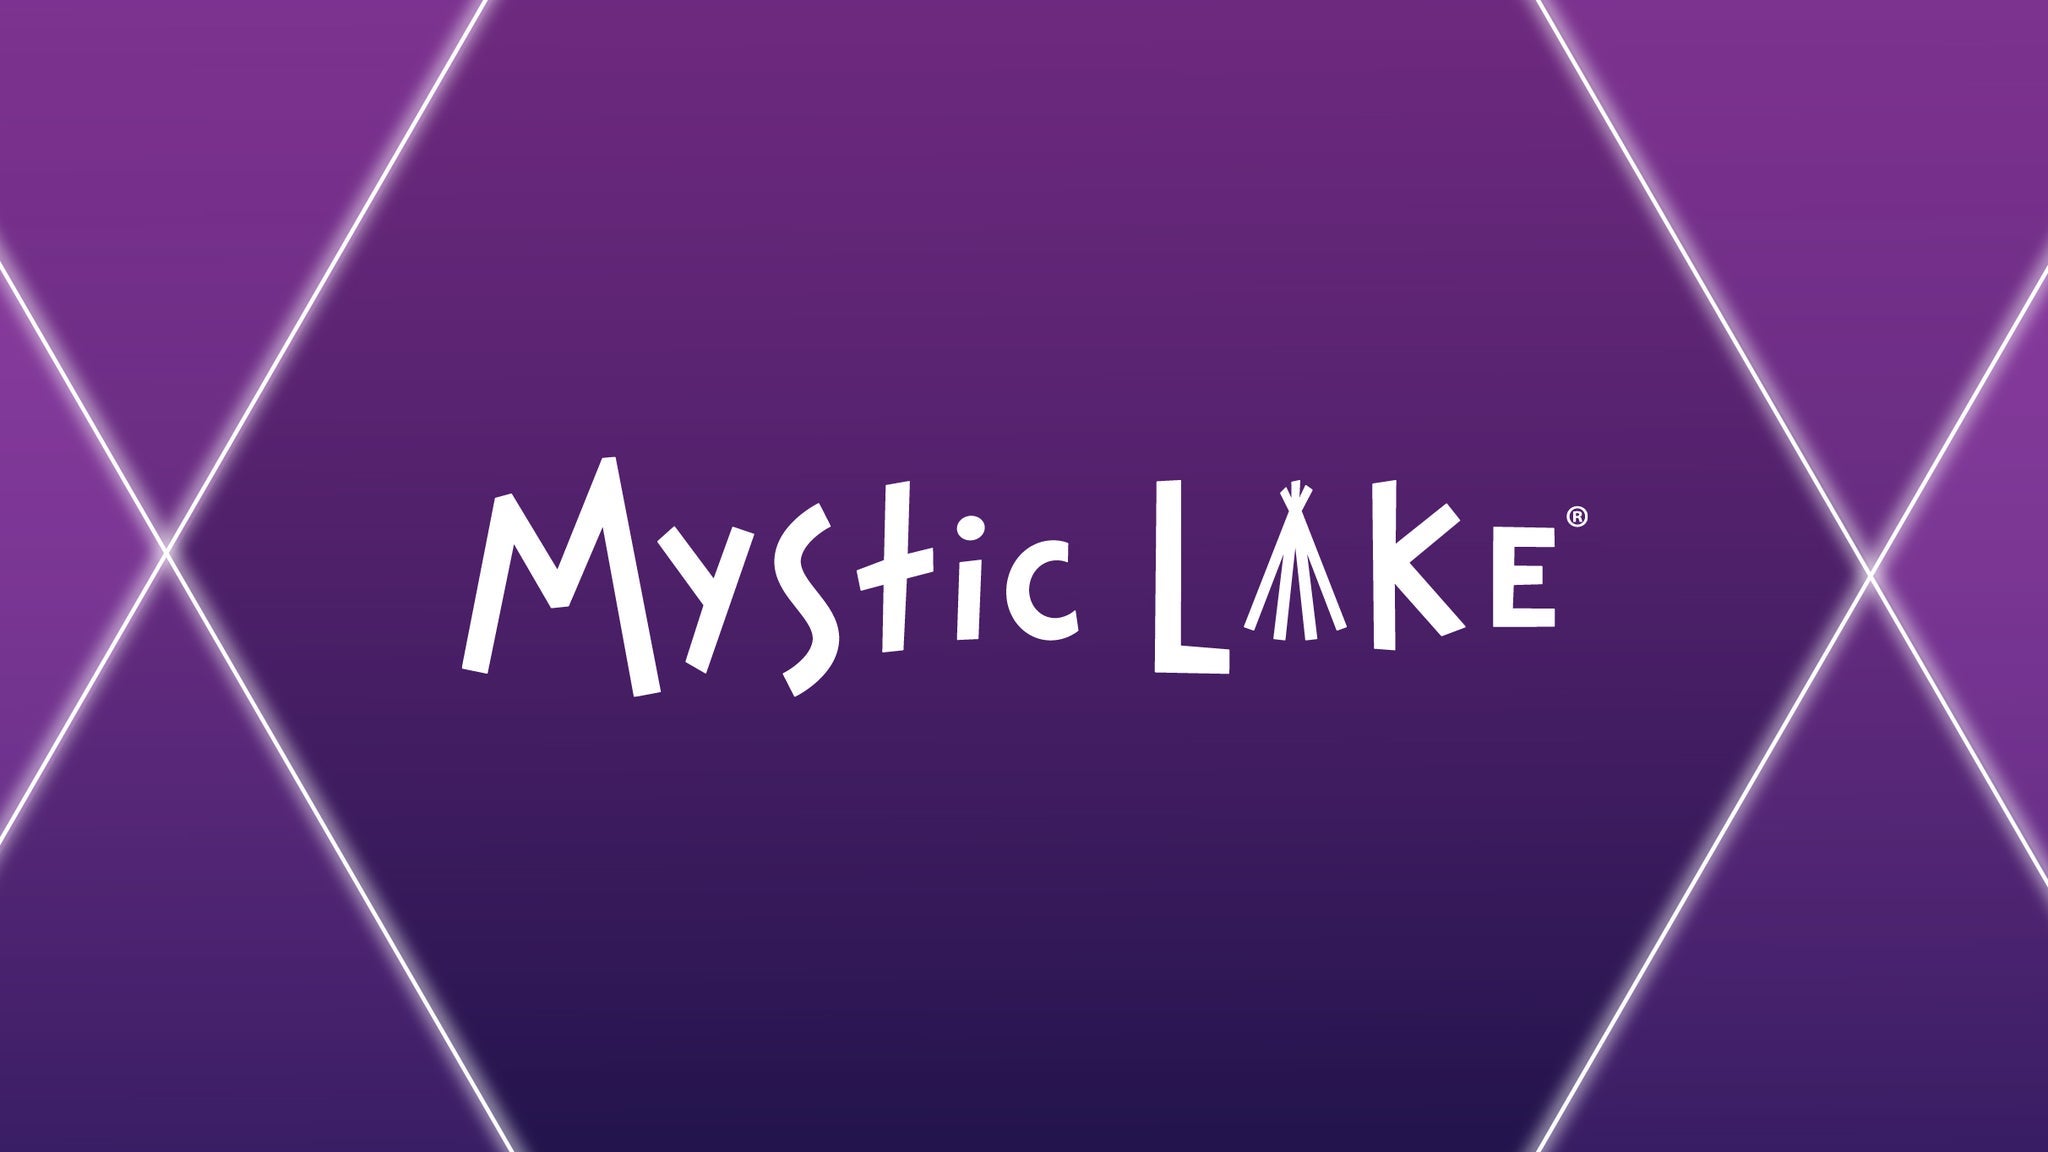 Rock, Brats & Beer - Friday in Prior Lake promo photo for Mystic Email presale offer code